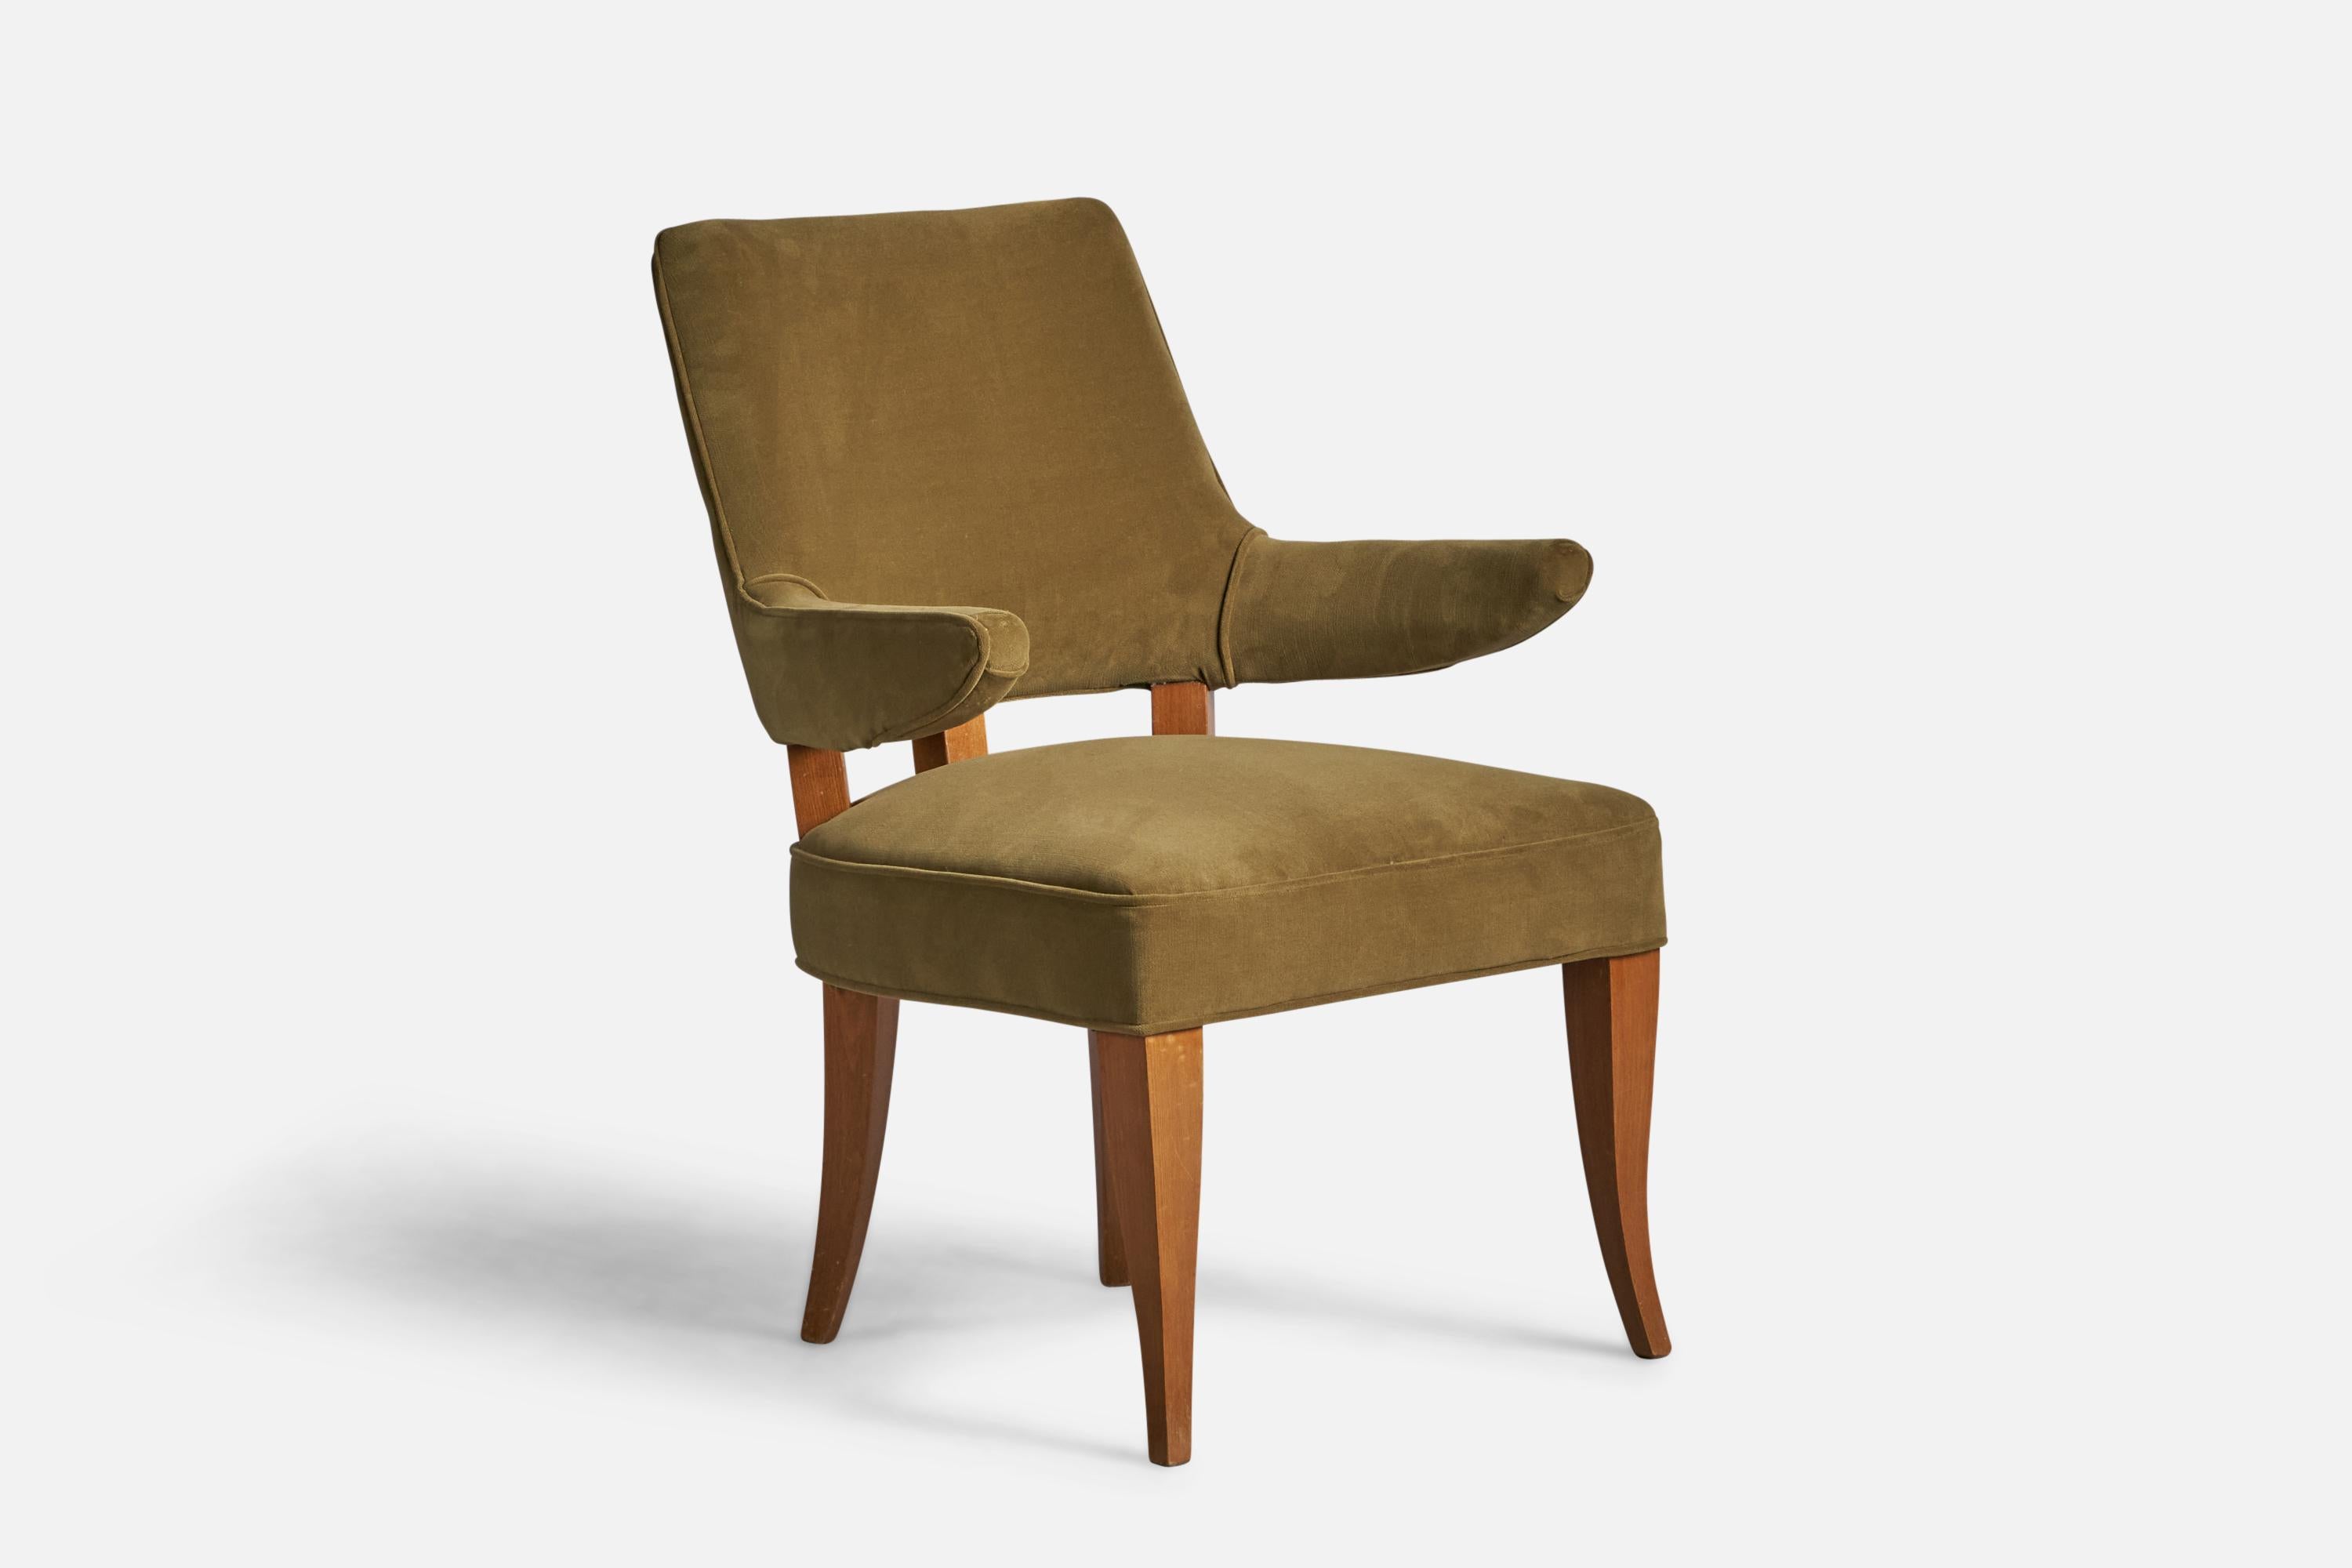 A wood and green velvet armchair designed and produced by Maurizio Tempestini, Italy, 1940s.

18” seat height